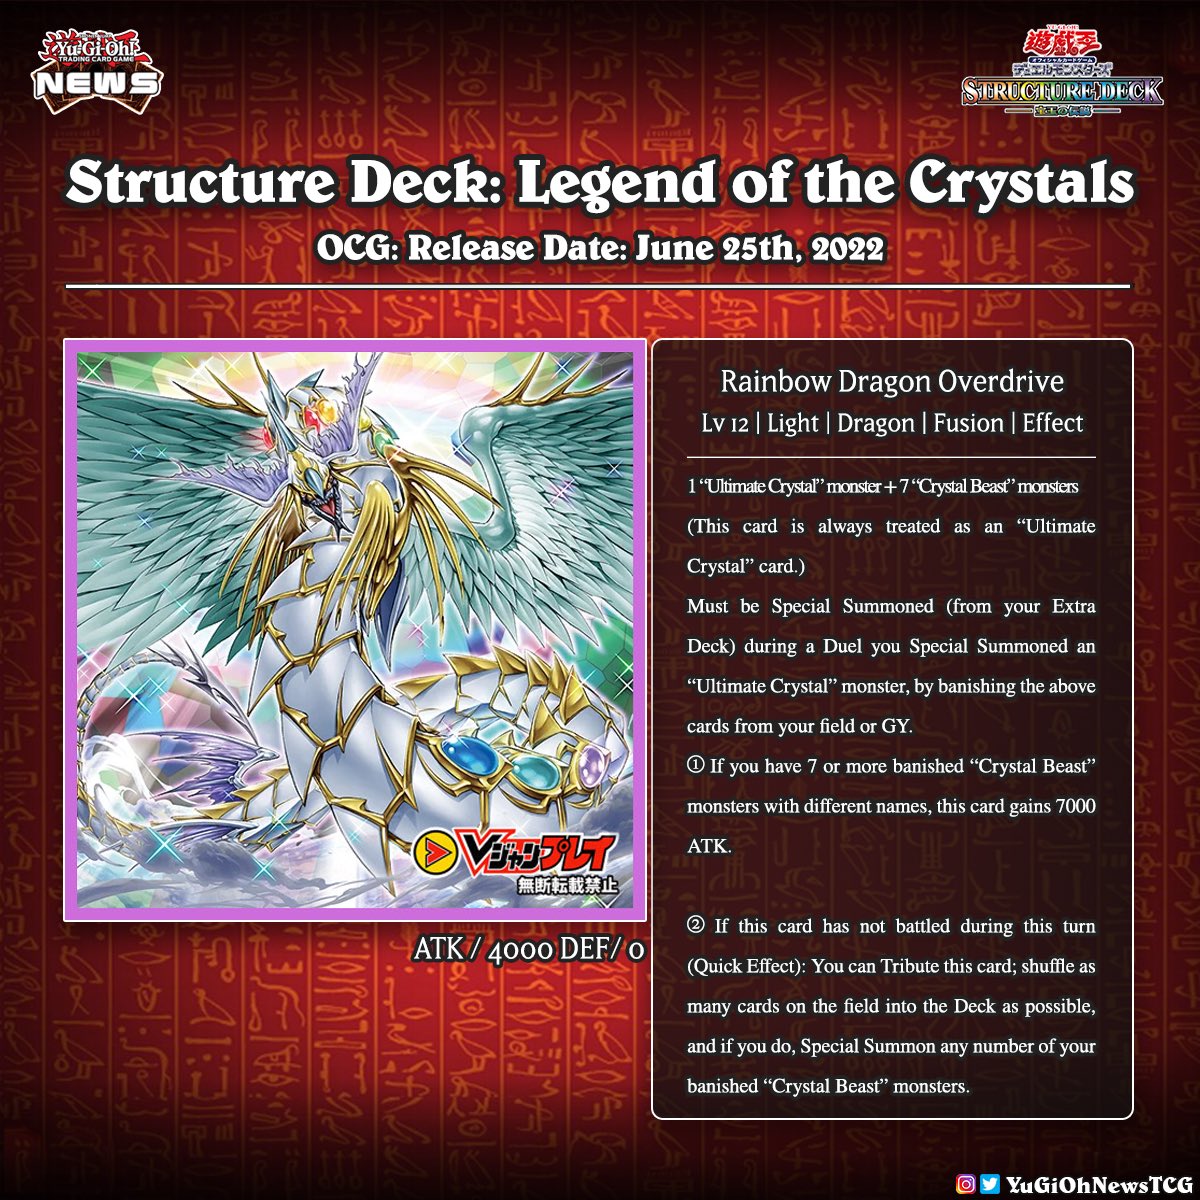 Yugioh News 𝗟𝗲𝗴𝗲𝗻𝗱 𝗼𝗳 𝘁𝗵𝗲 𝗖𝗿𝘆𝘀𝘁𝗮𝗹𝘀 The Ace Monster Of The Upcoming Structure Deck Legend Of The Crystals Has Been Revealed Translation Ygorganization 遊戯王 Yugioh 유희왕 T Co 4smyhe4p6q